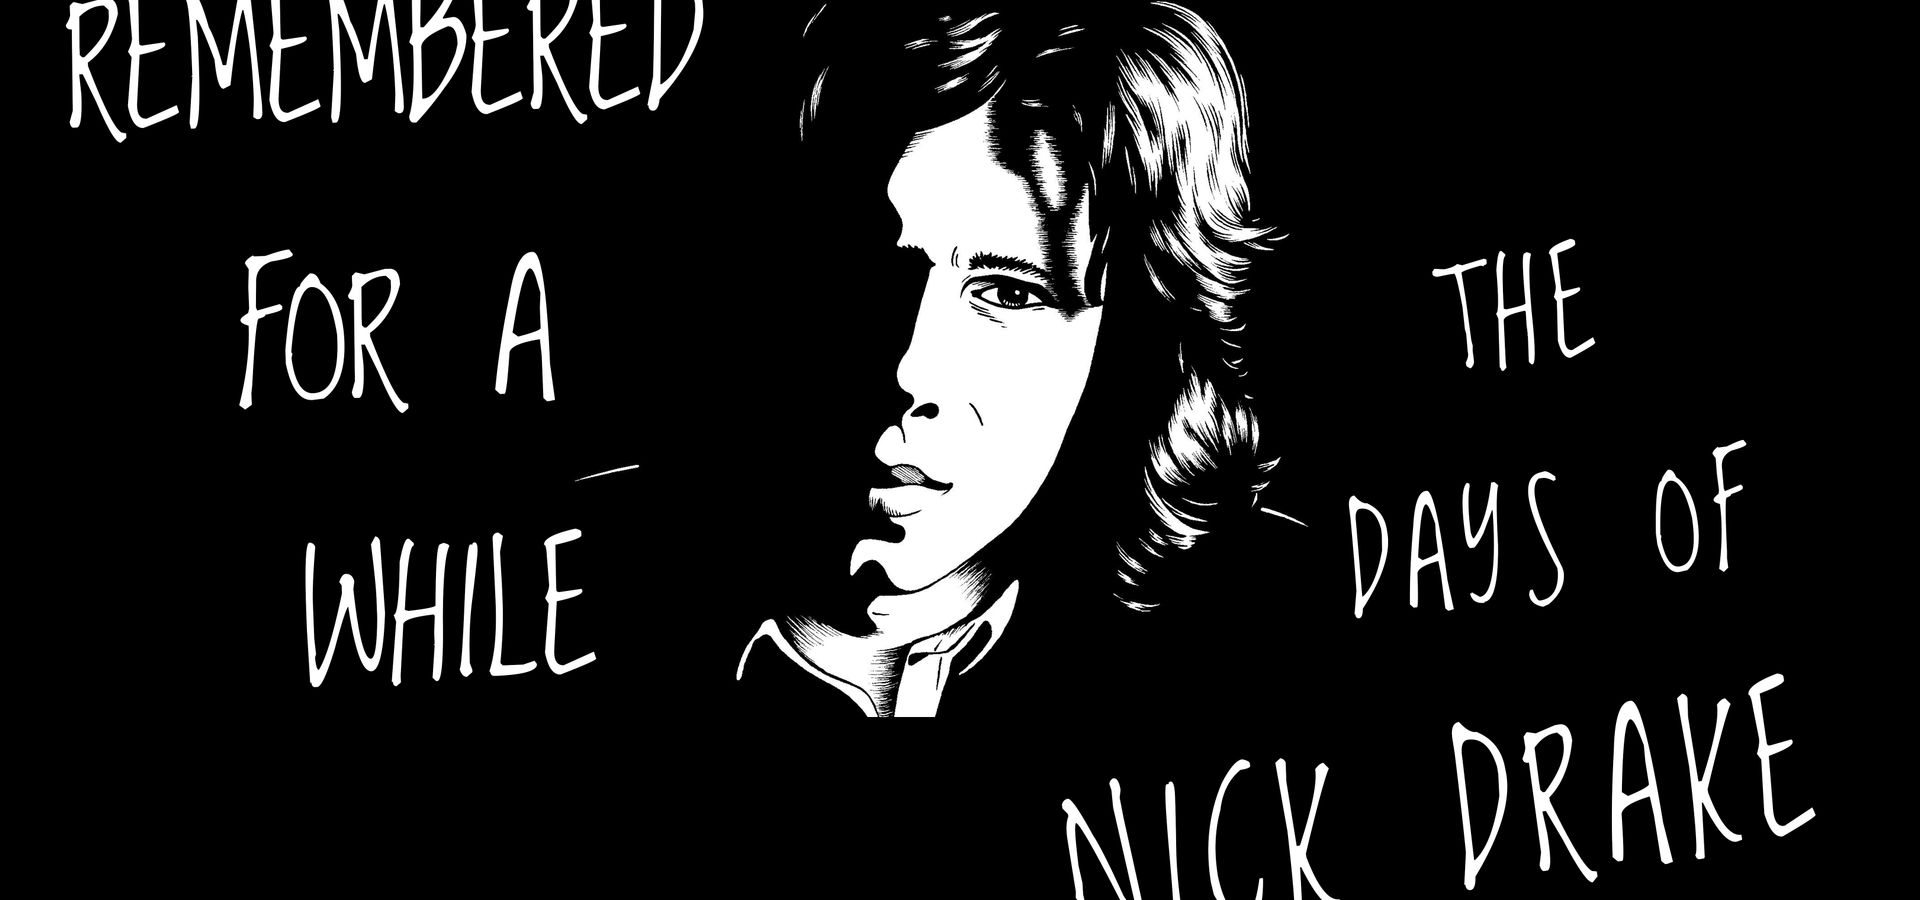 Annelies Van Dinter, Gianni Marzo, Nicolas Rombouts, Jan Swerts en Renée Sys - Remembered For a While: The Days of Nick Drake